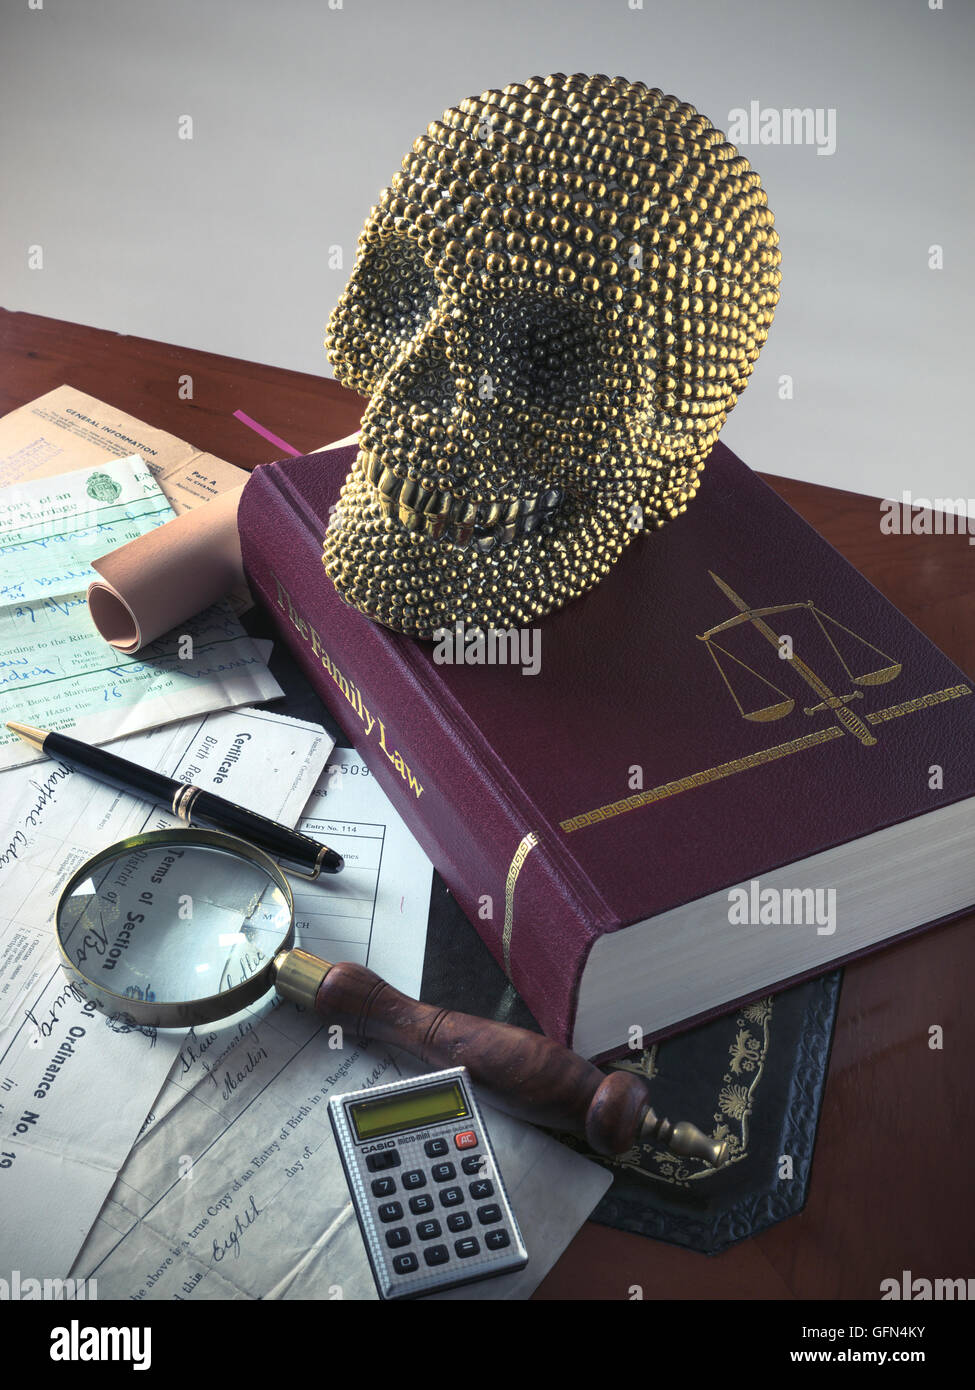 Legal Will last testament inheritance humour smiling gold human skull on Family Law book with various official legal probate family documents Concept Stock Photo